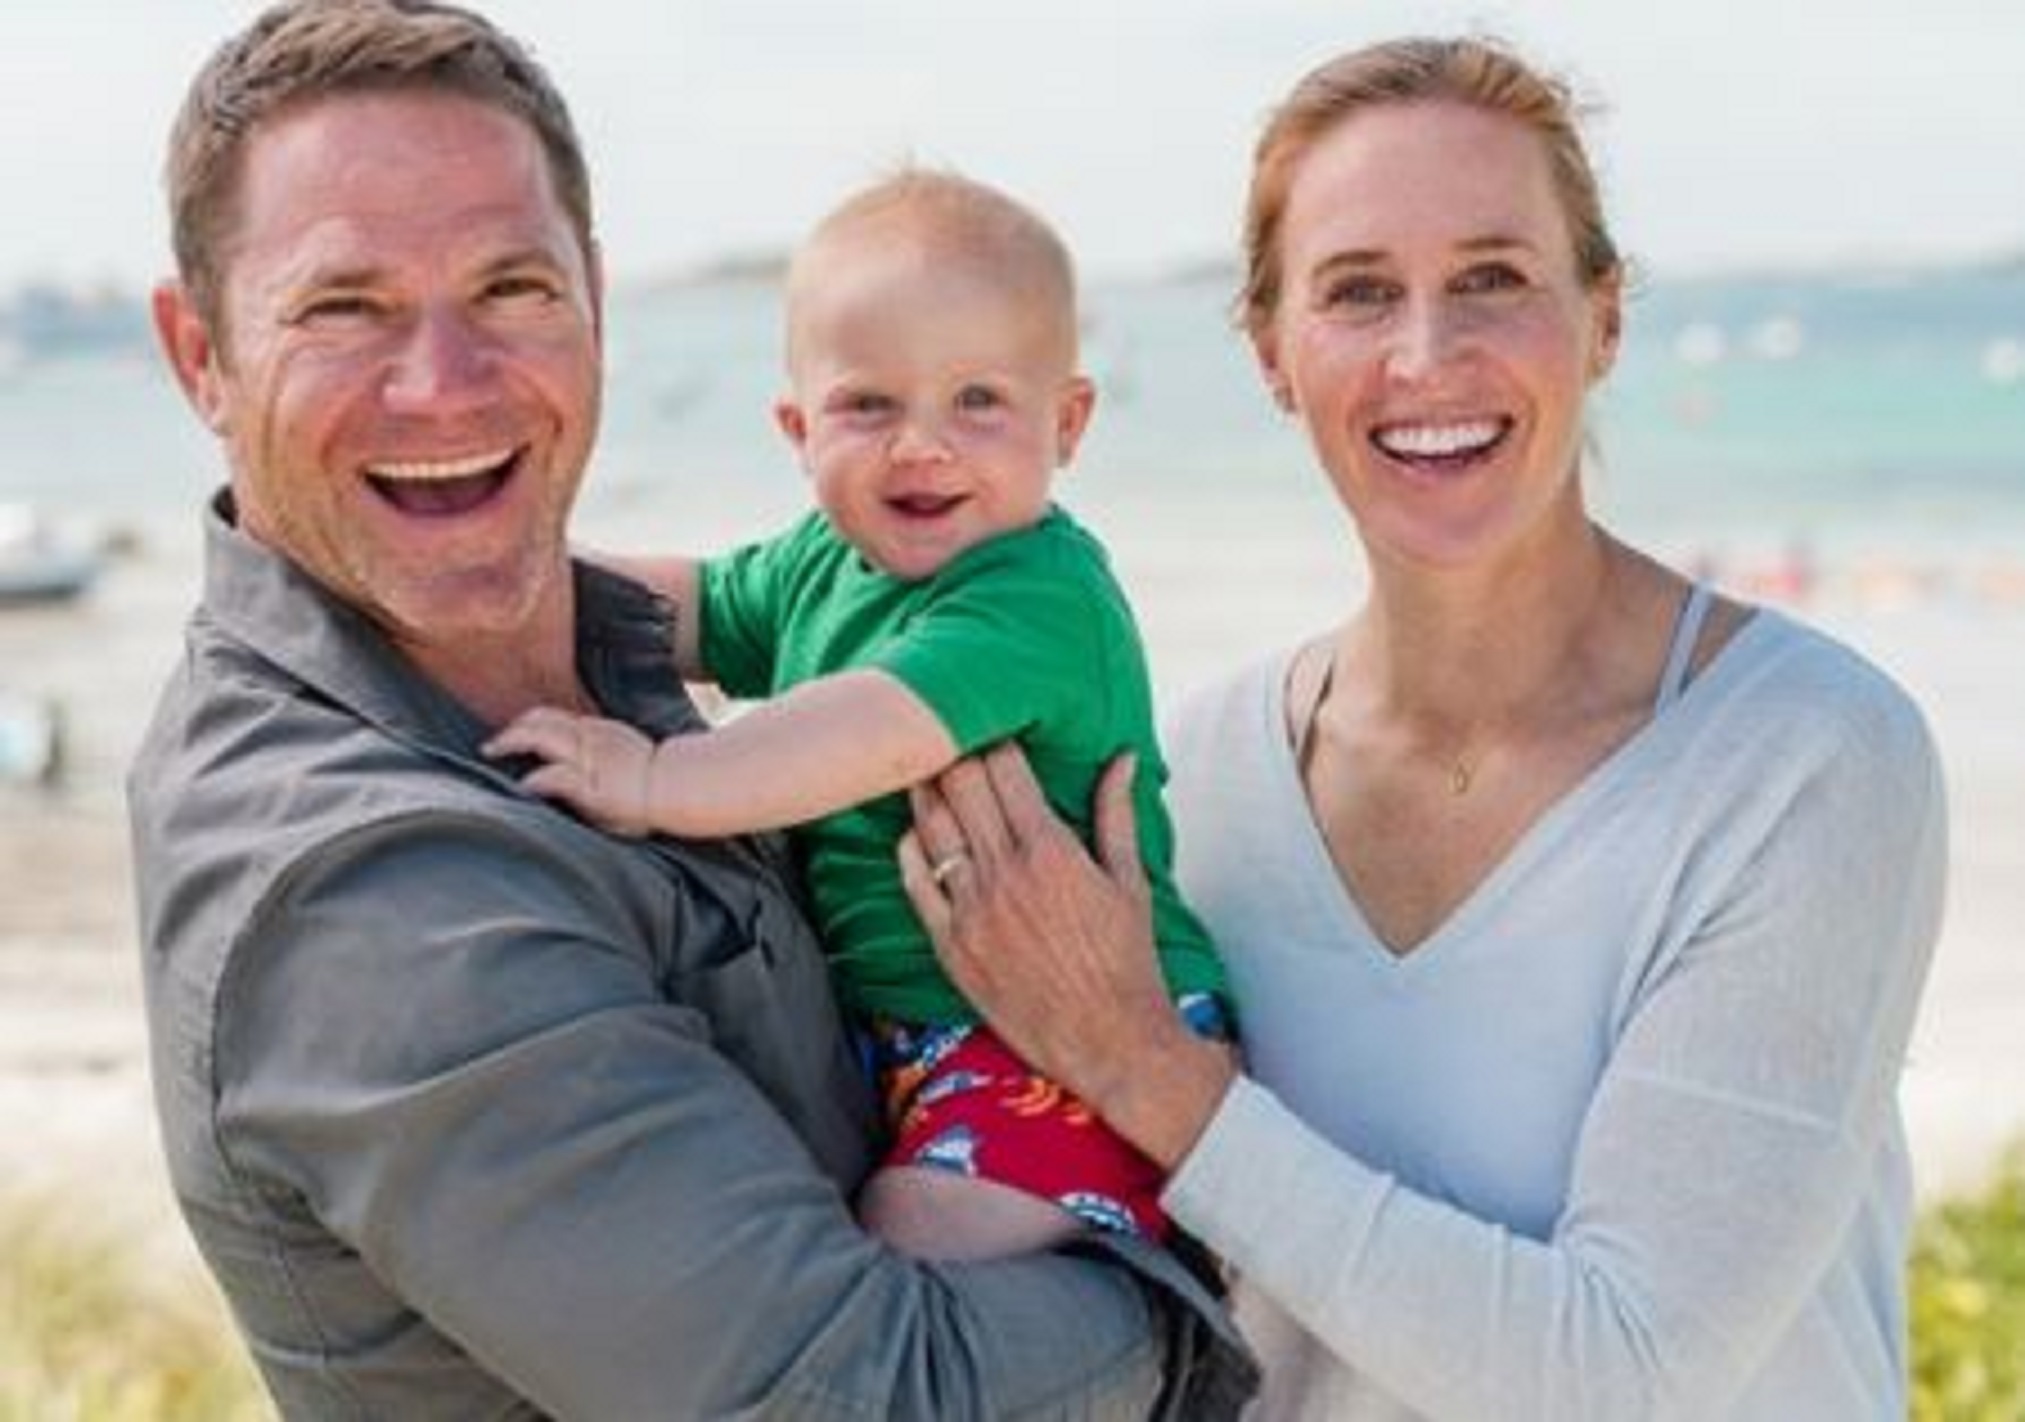 Image: Steve Backshall with his wife and Kids on holiday. Know more about Steve wedding, marital relationship, spouse, children, Affairs, and nuptial details